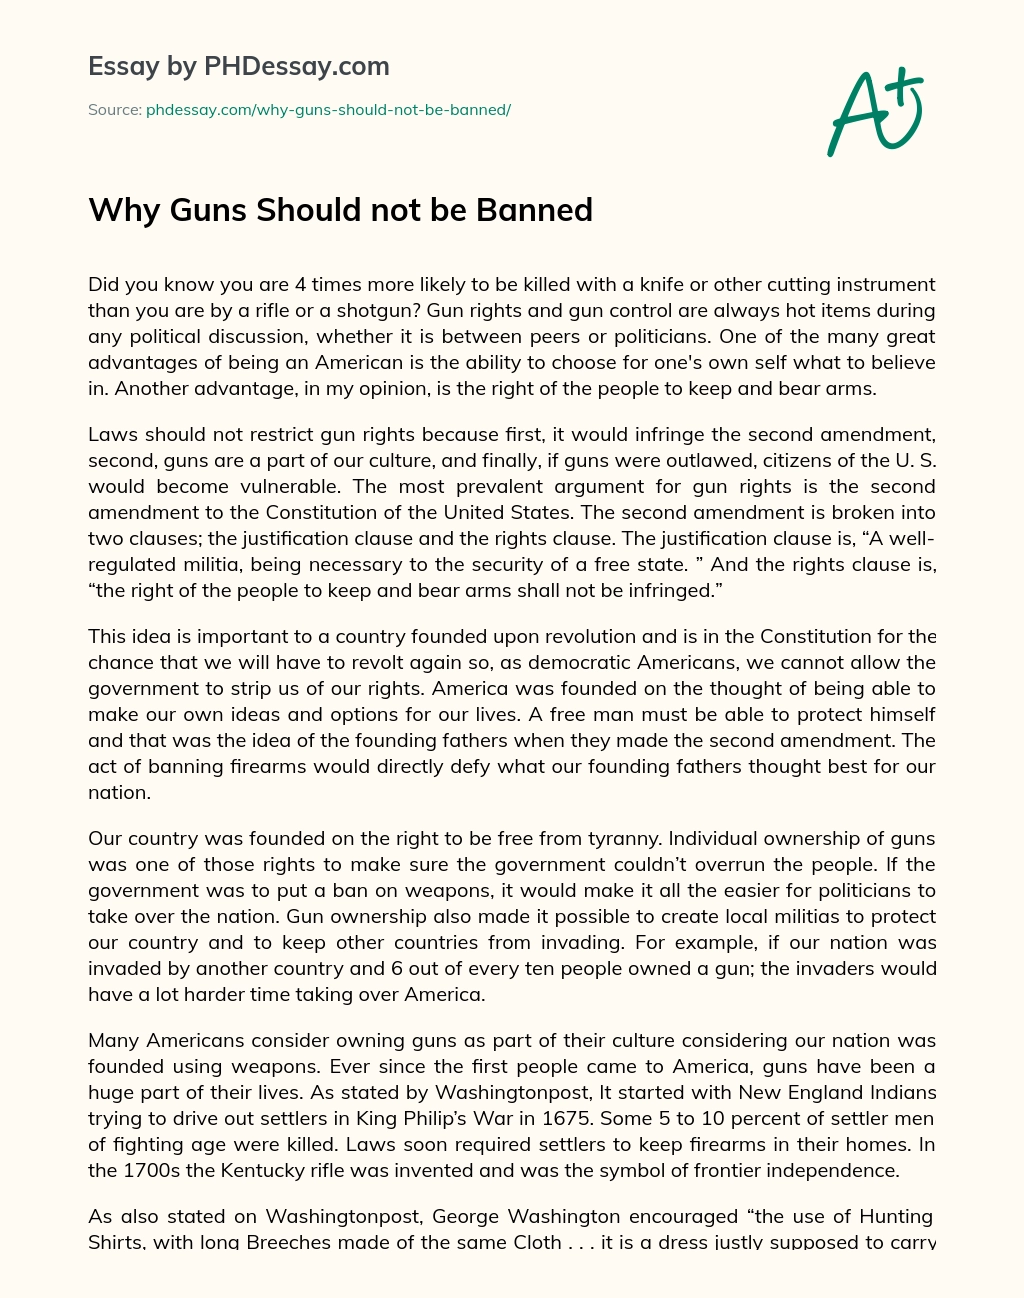 Why Guns Should not be Banned essay